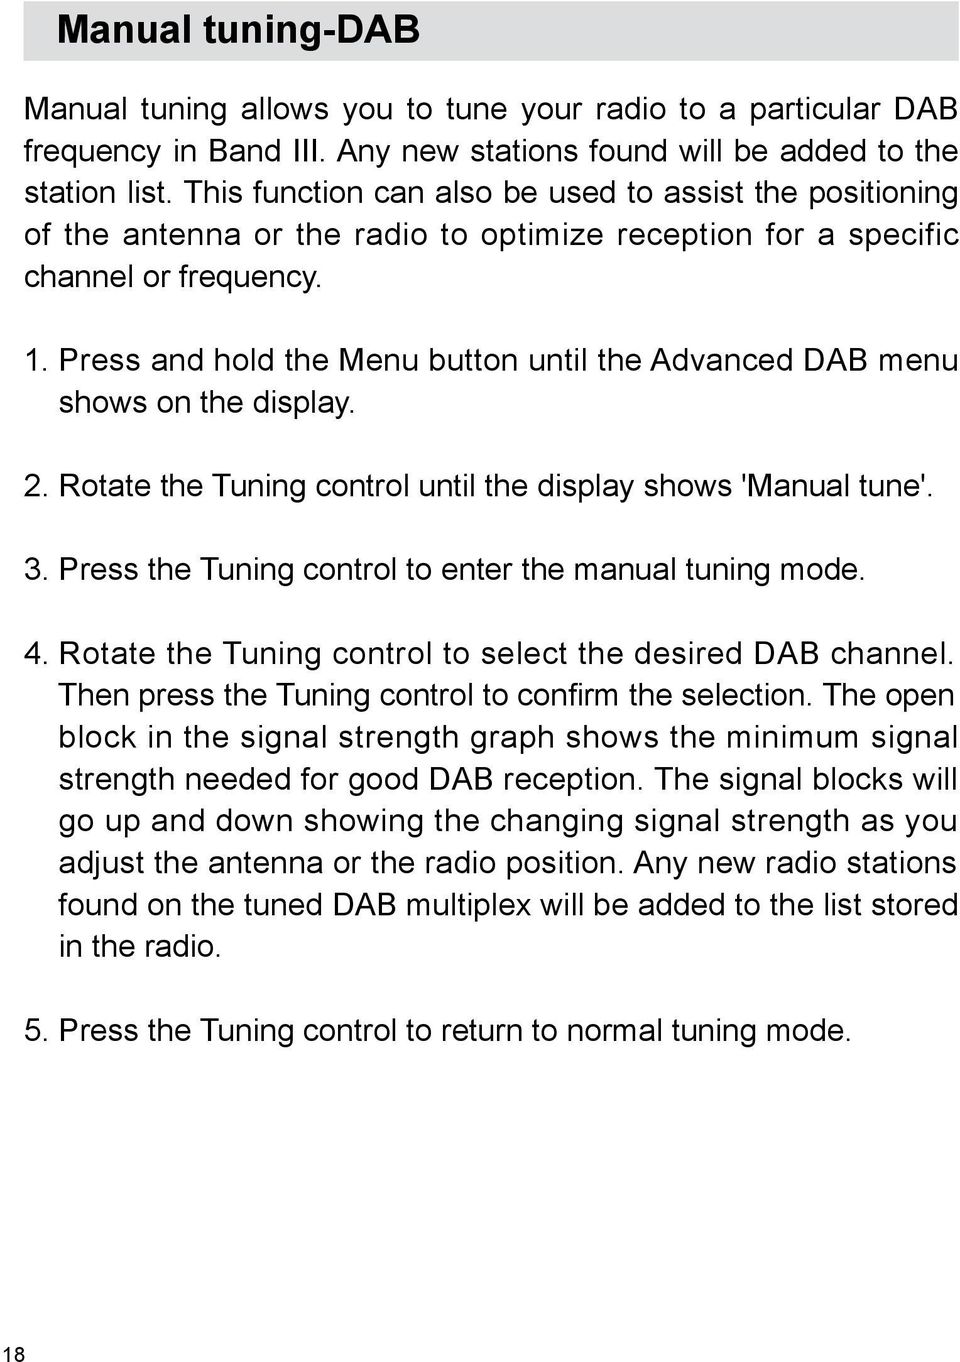 Press and hold the Menu button until the Advanced DAB menu shows on the display. 2. Rotate the Tuning control until the display shows 'Manual tune'. 3.